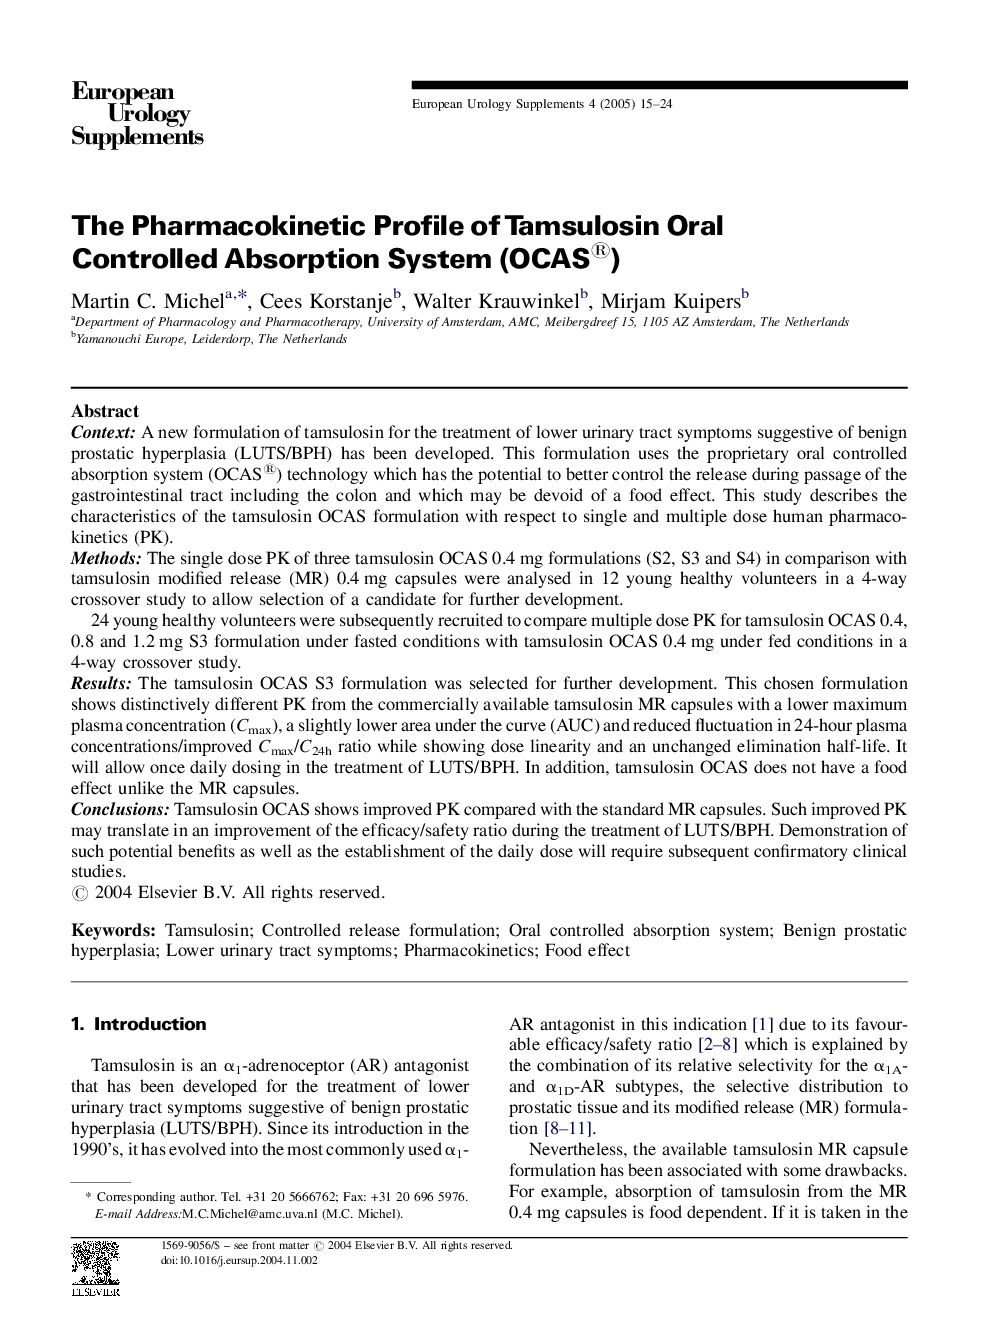 The Pharmacokinetic Profile of Tamsulosin Oral Controlled Absorption System (OCAS®)